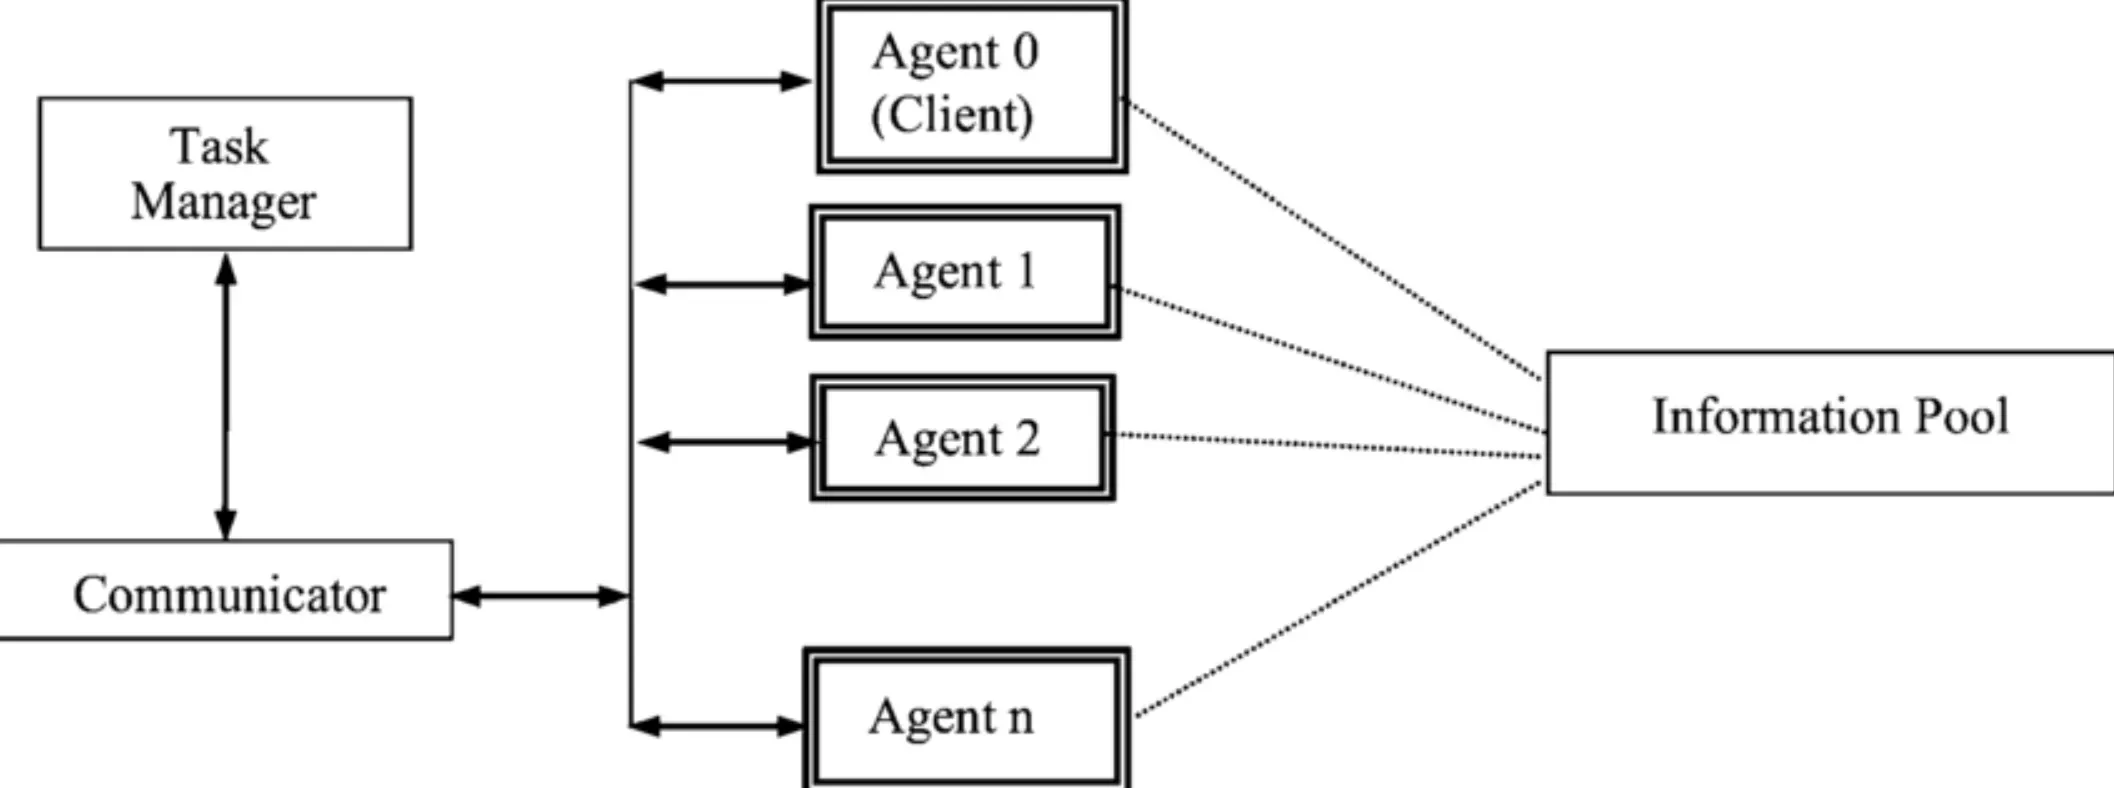 Components of an Agent Interface